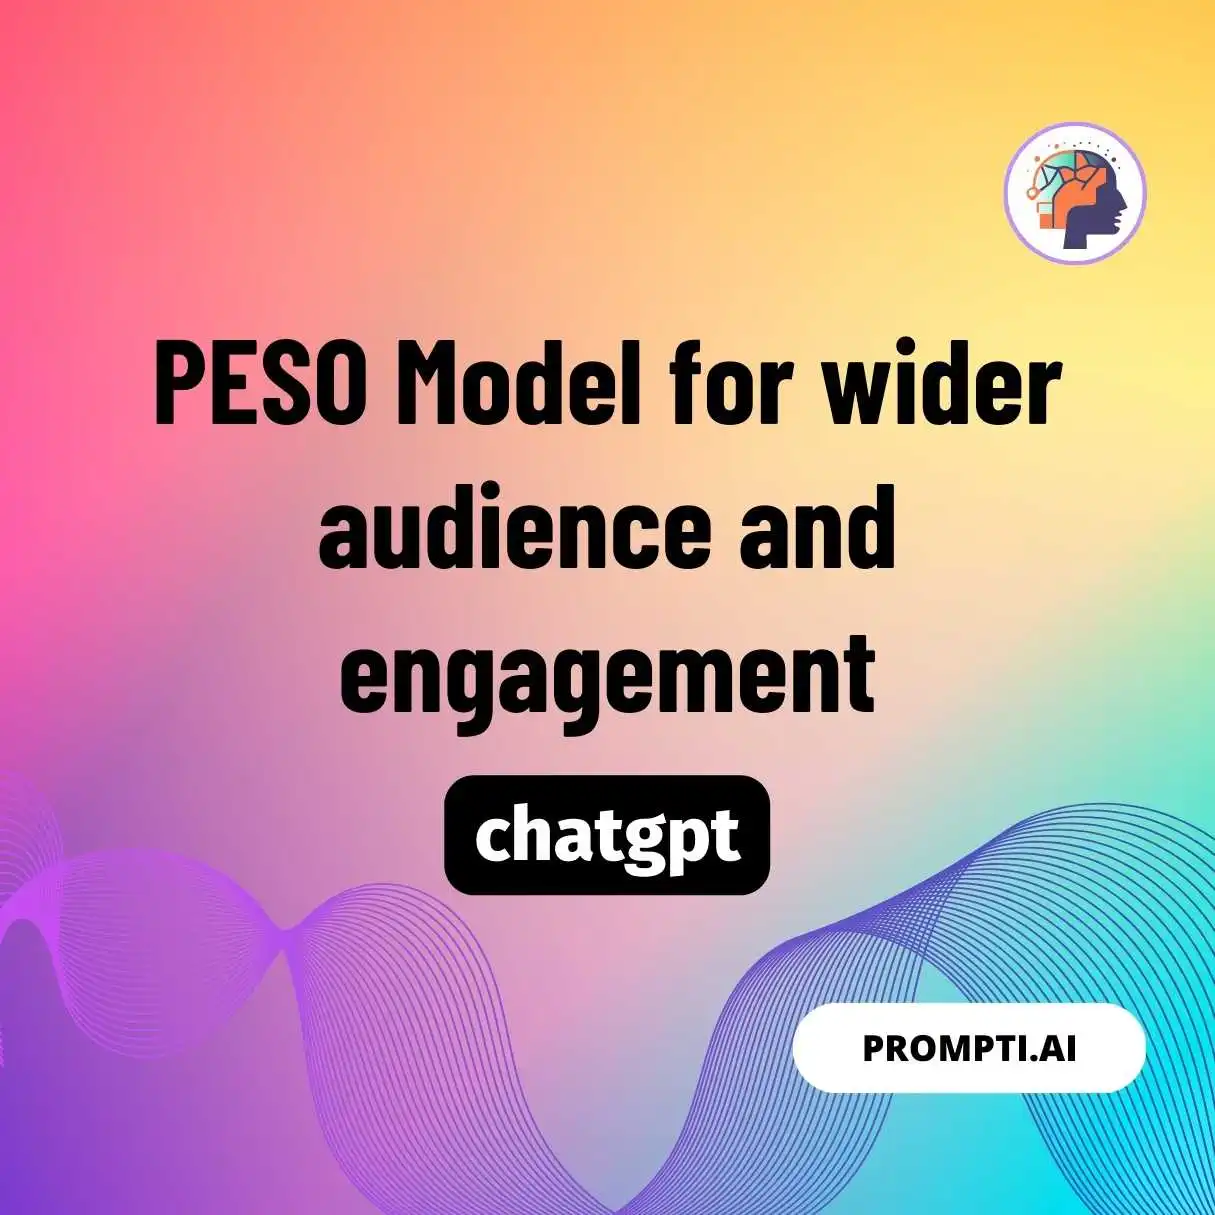 PESO Model for wider audience and engagement